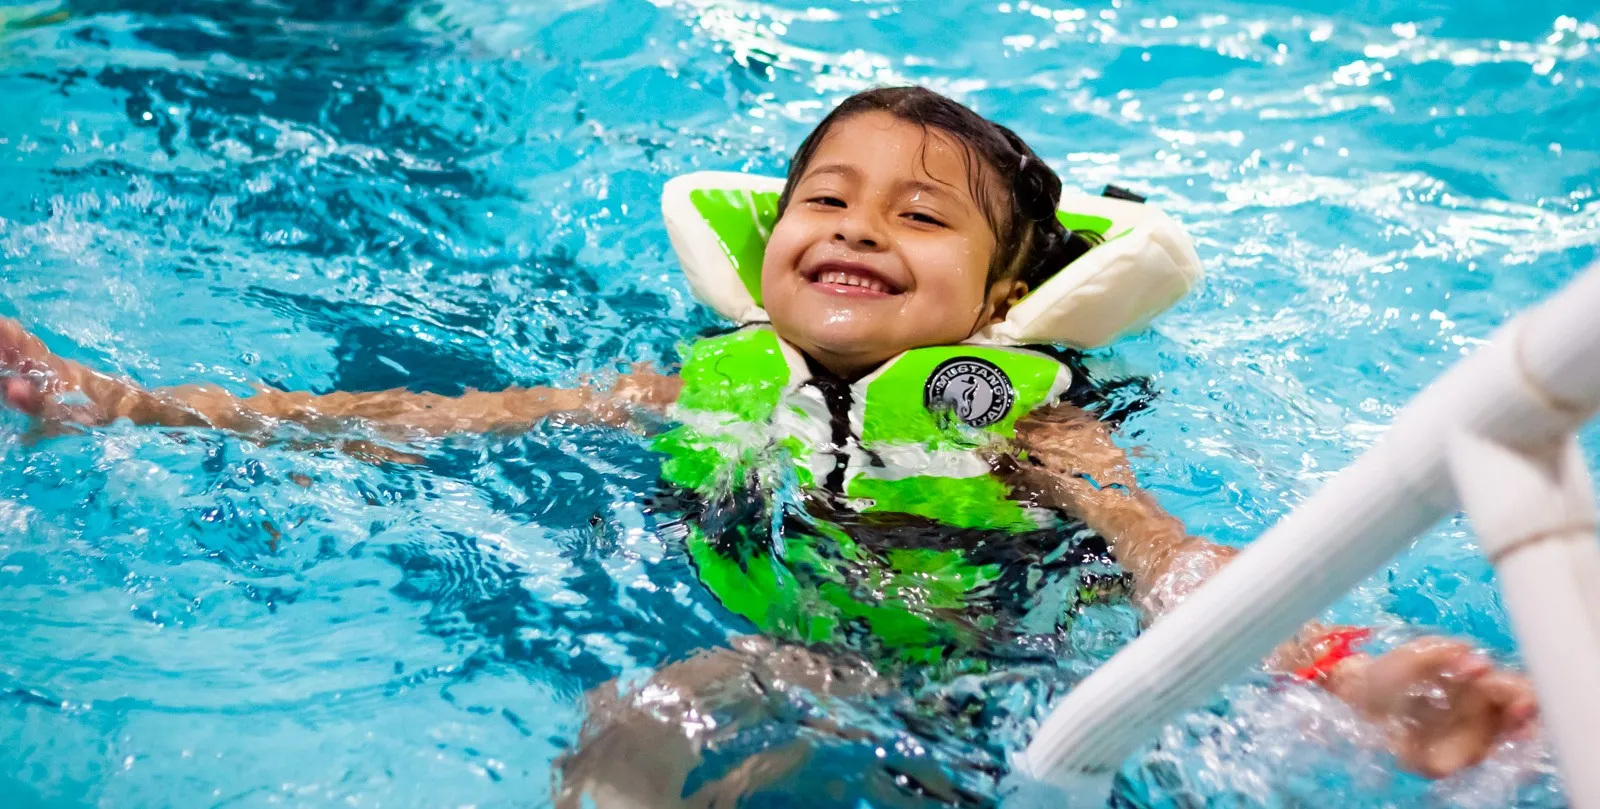 Young child smiles at camera while paddling around pool in a bulky green lifejacket.